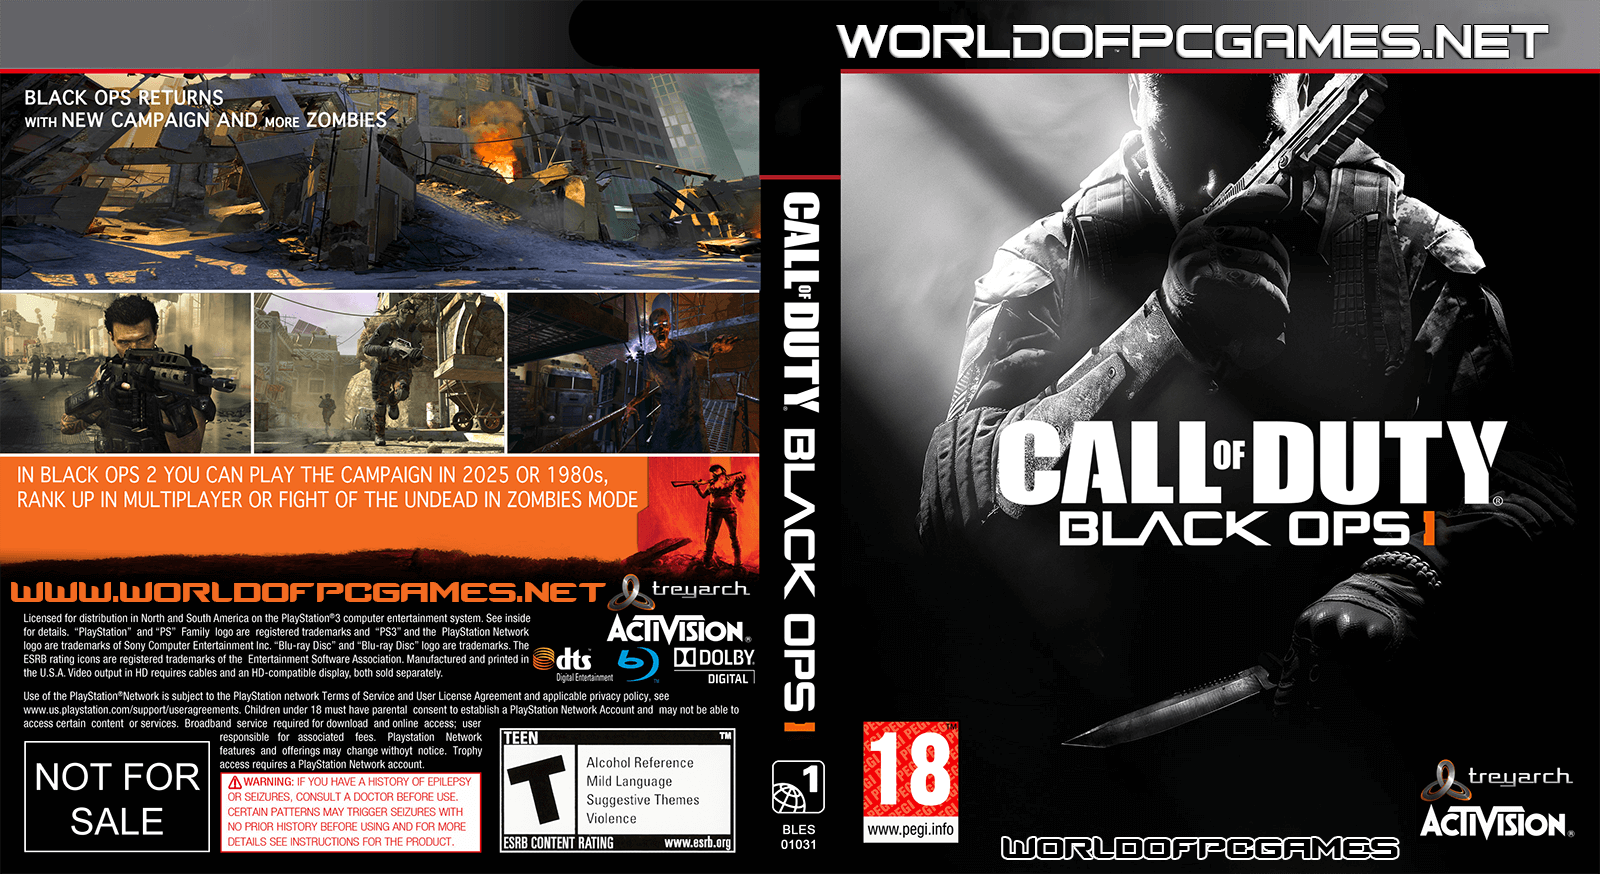 Диск игры call of duty. Black ops 2 PLAYSTATION. Call of Duty Black ops 3 ps3 диск. Call of Duty Black ops II ps3 обложка. Black ops 2 ps3.